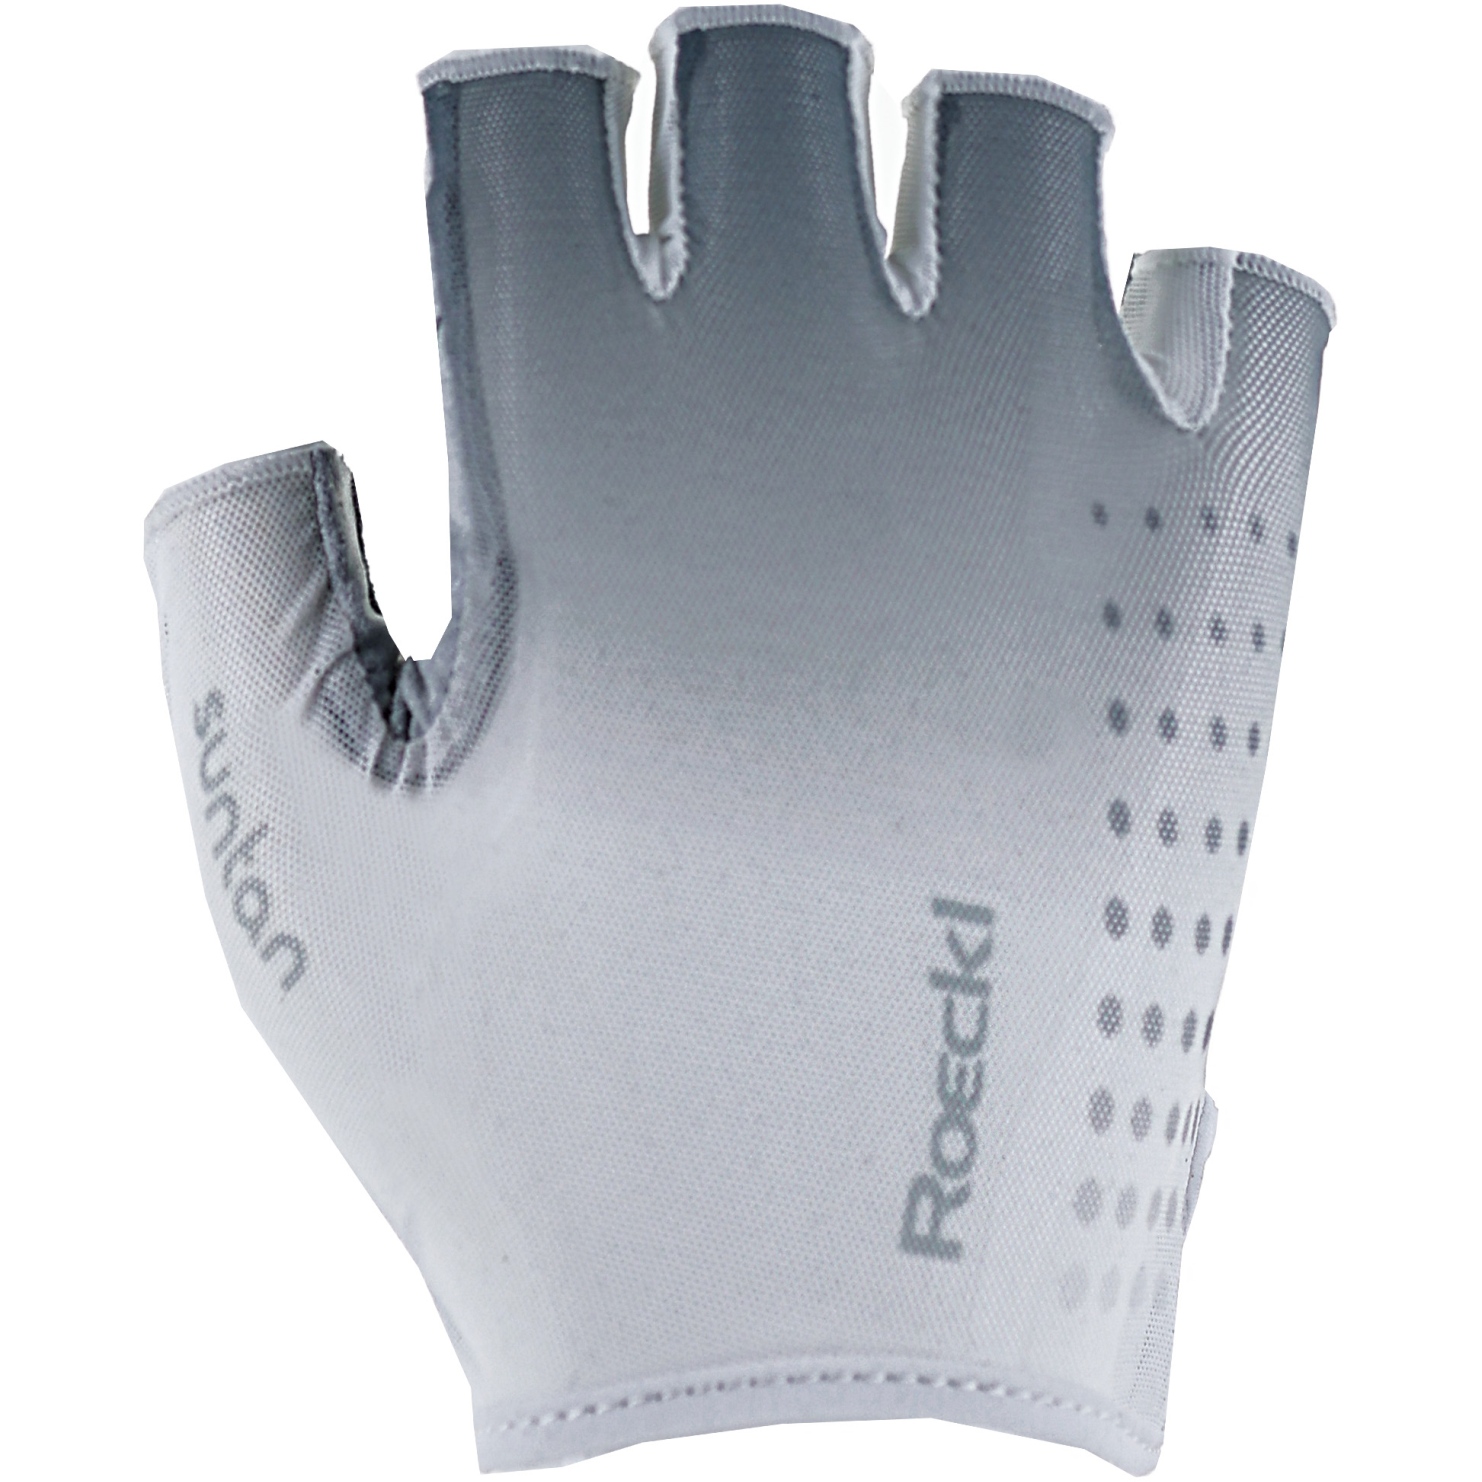 Picture of Roeckl Sports Istia Cycling Gloves - white 1000